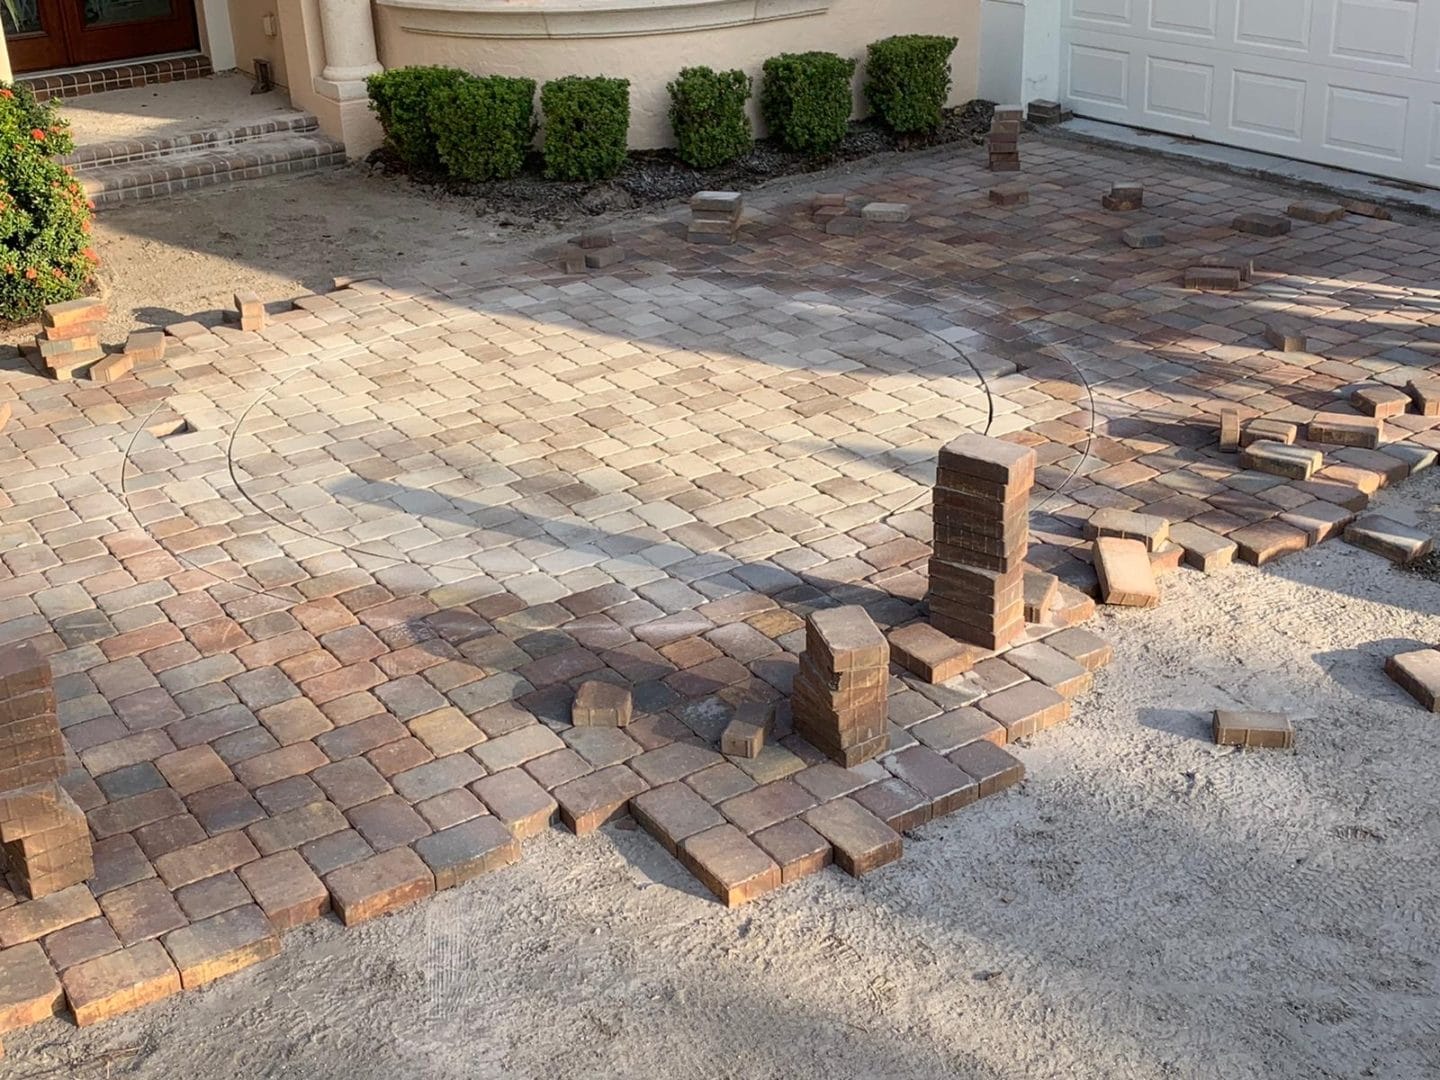 What Is The Cost Of Pavers Per Square Foot? 